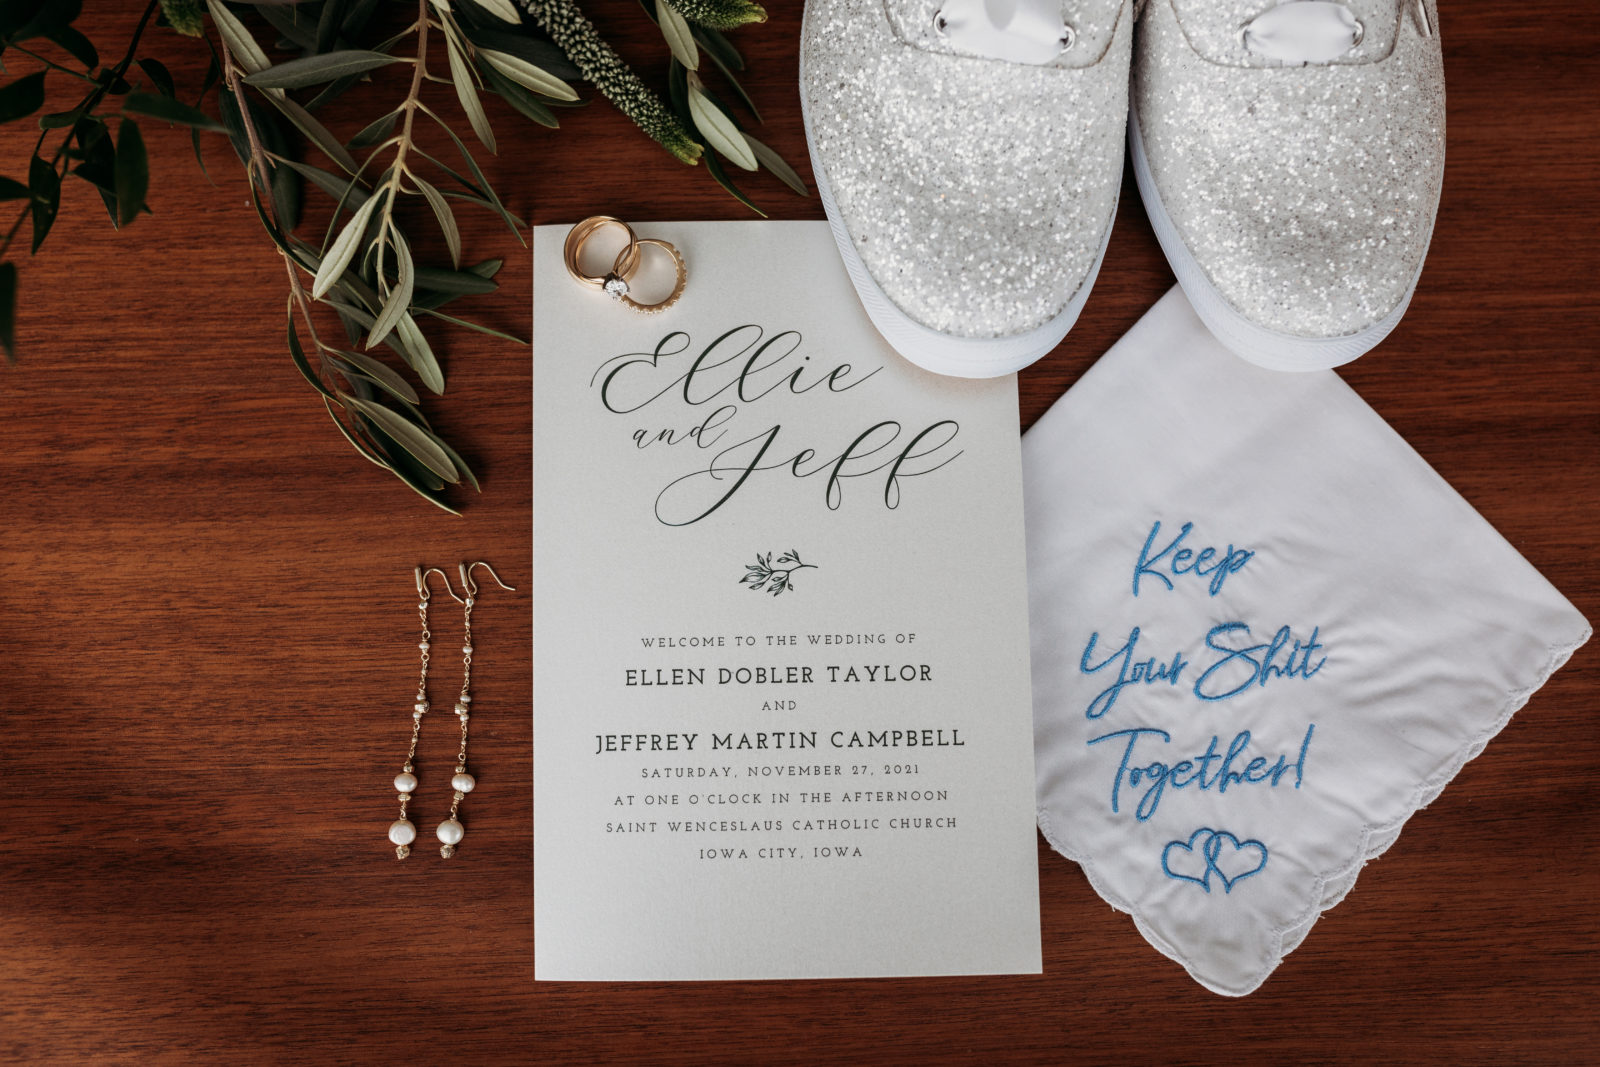 Keep your shit together handkerchief something blue wedding details flat lay